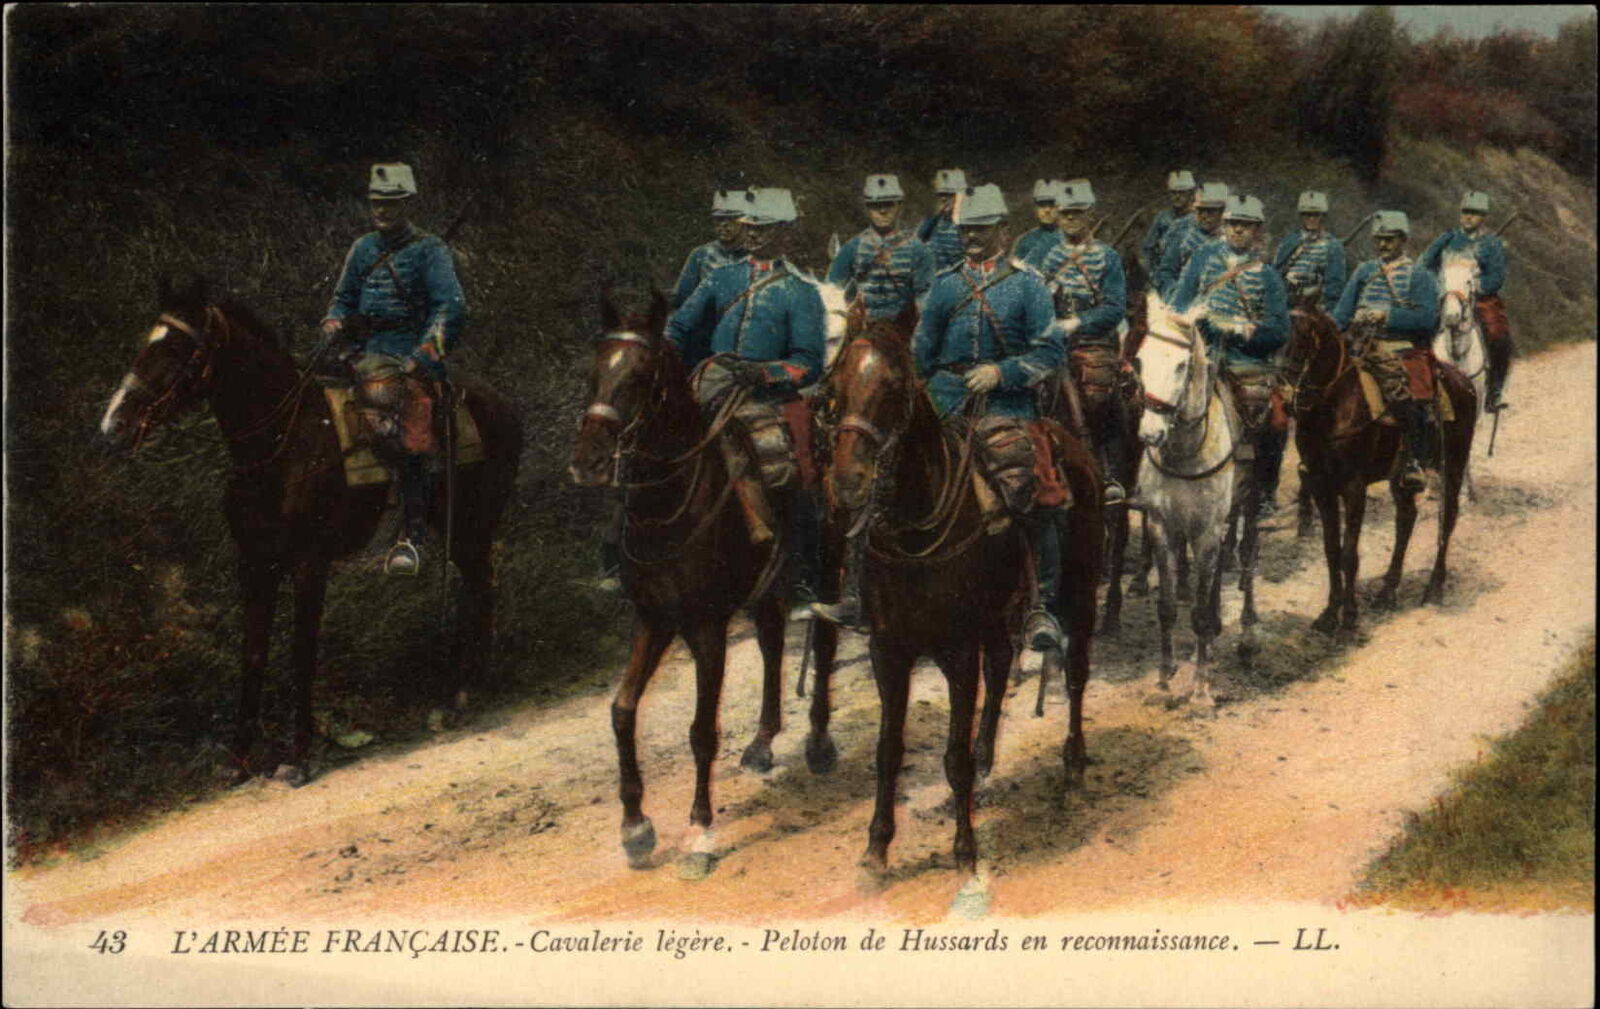 French Army WWI Horses Uniforms Cavalerie Legere c1915 Postcard